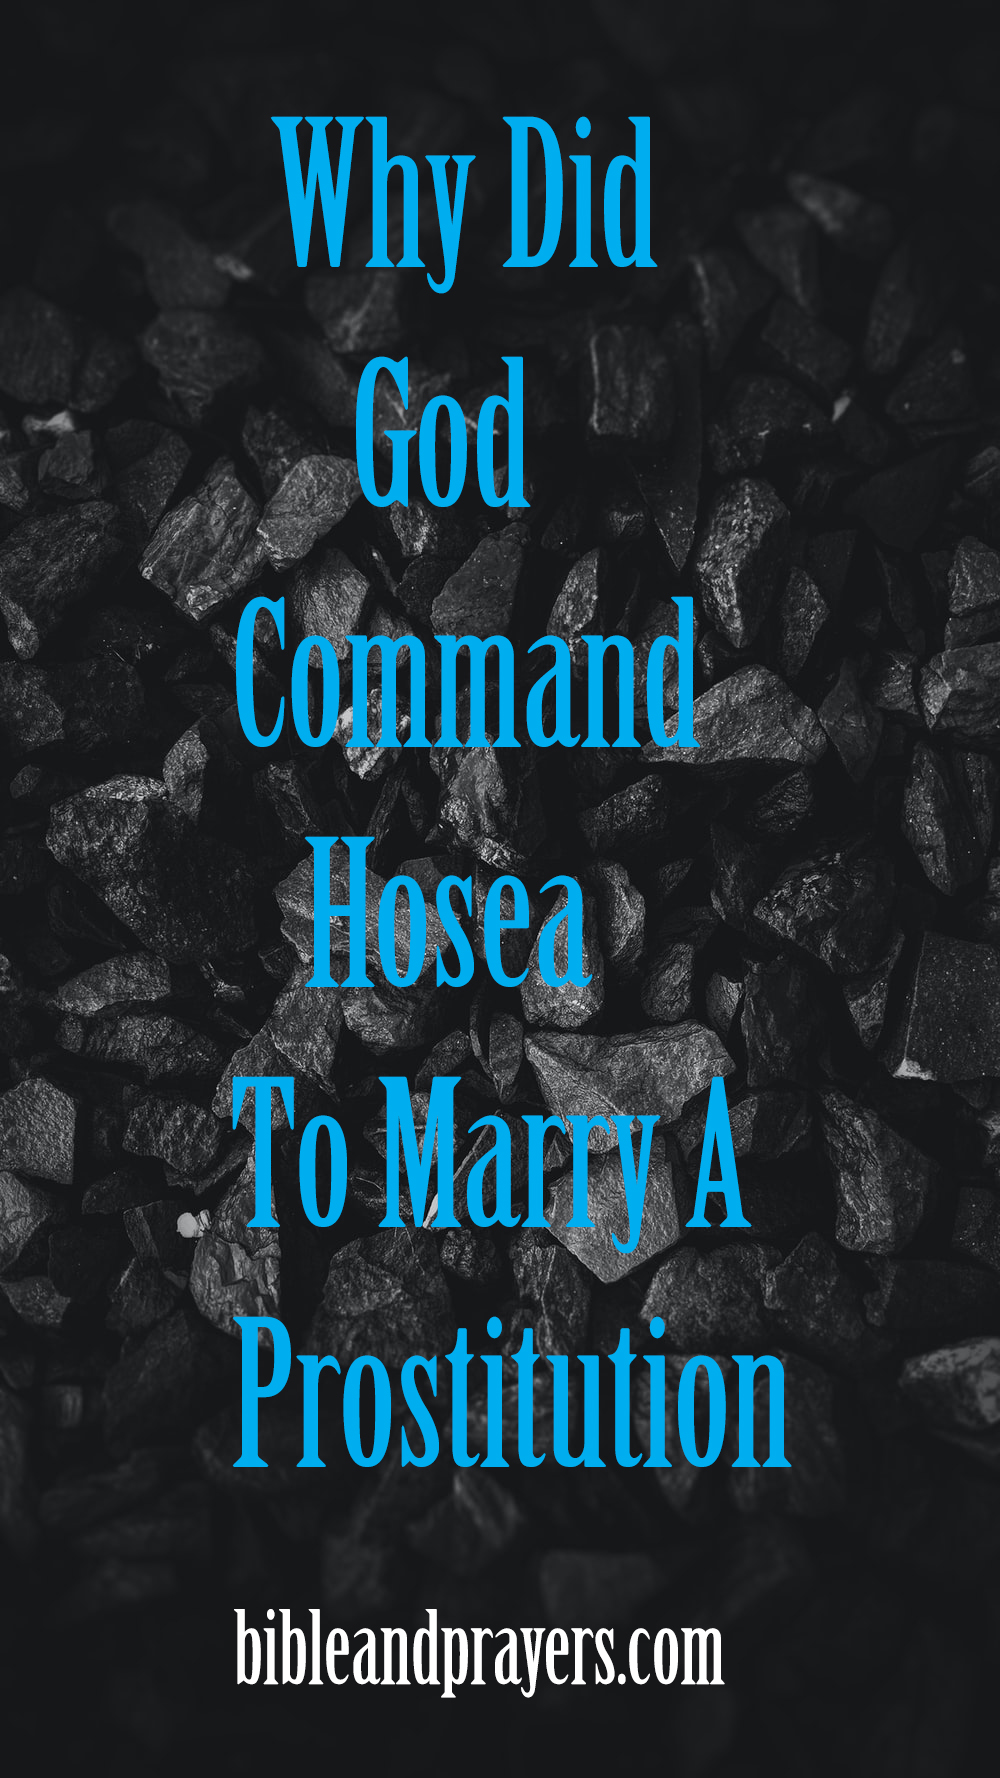 Why Did God Command Hosea To Marry A Prostitution